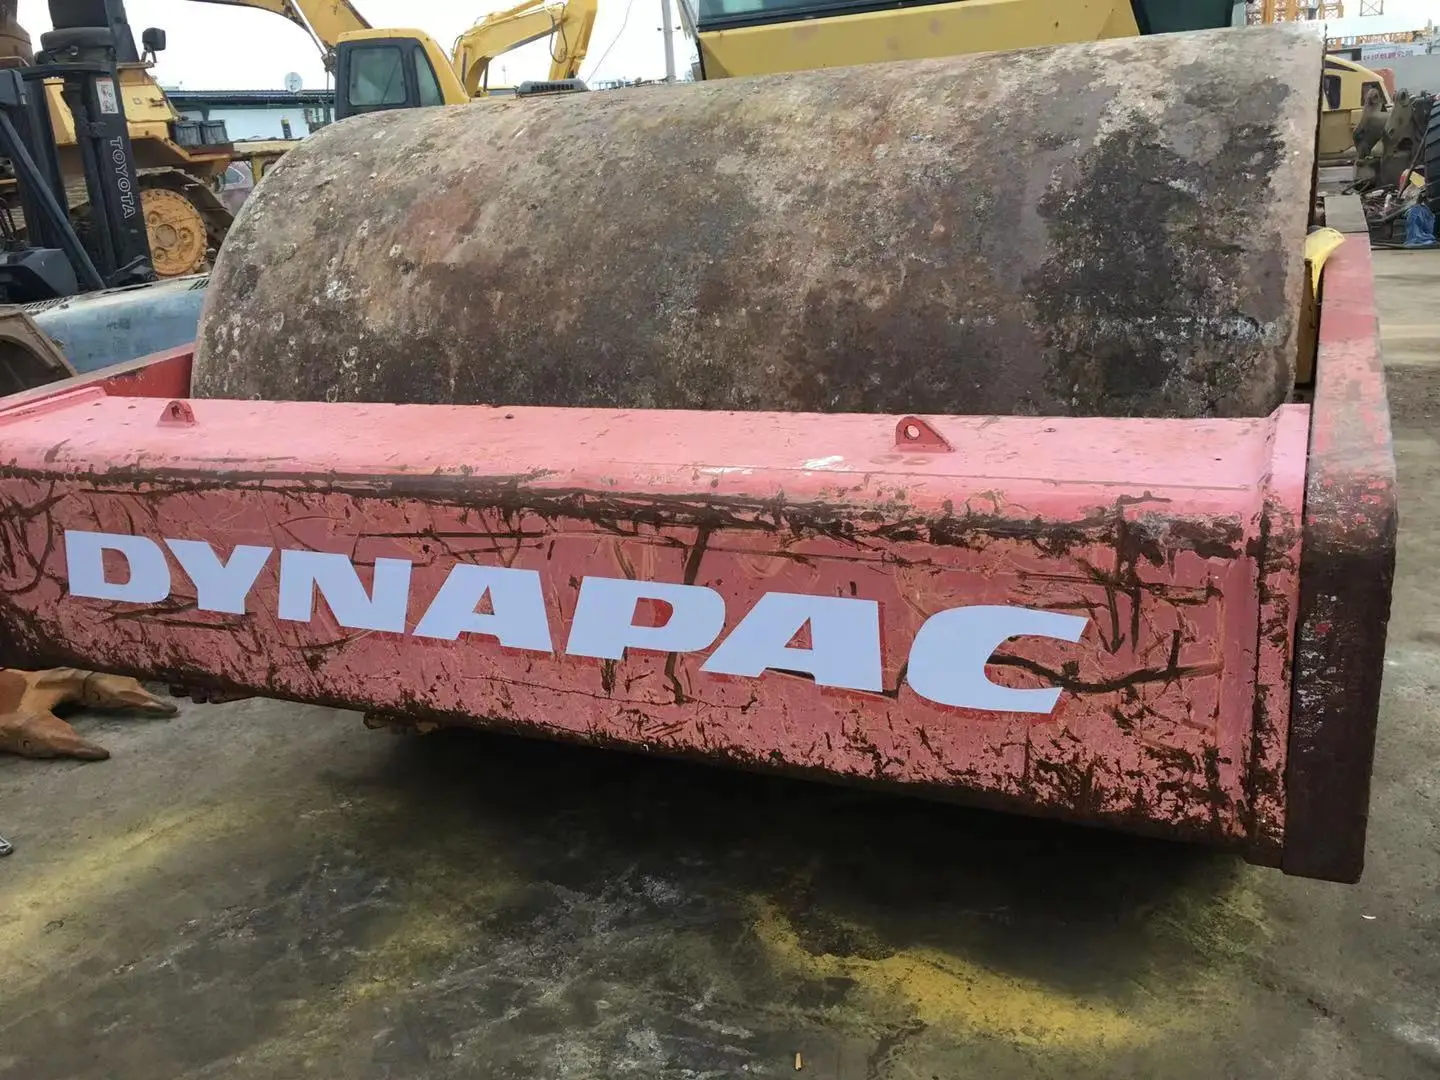 New arrival used Dynapac road construction equipment CA602